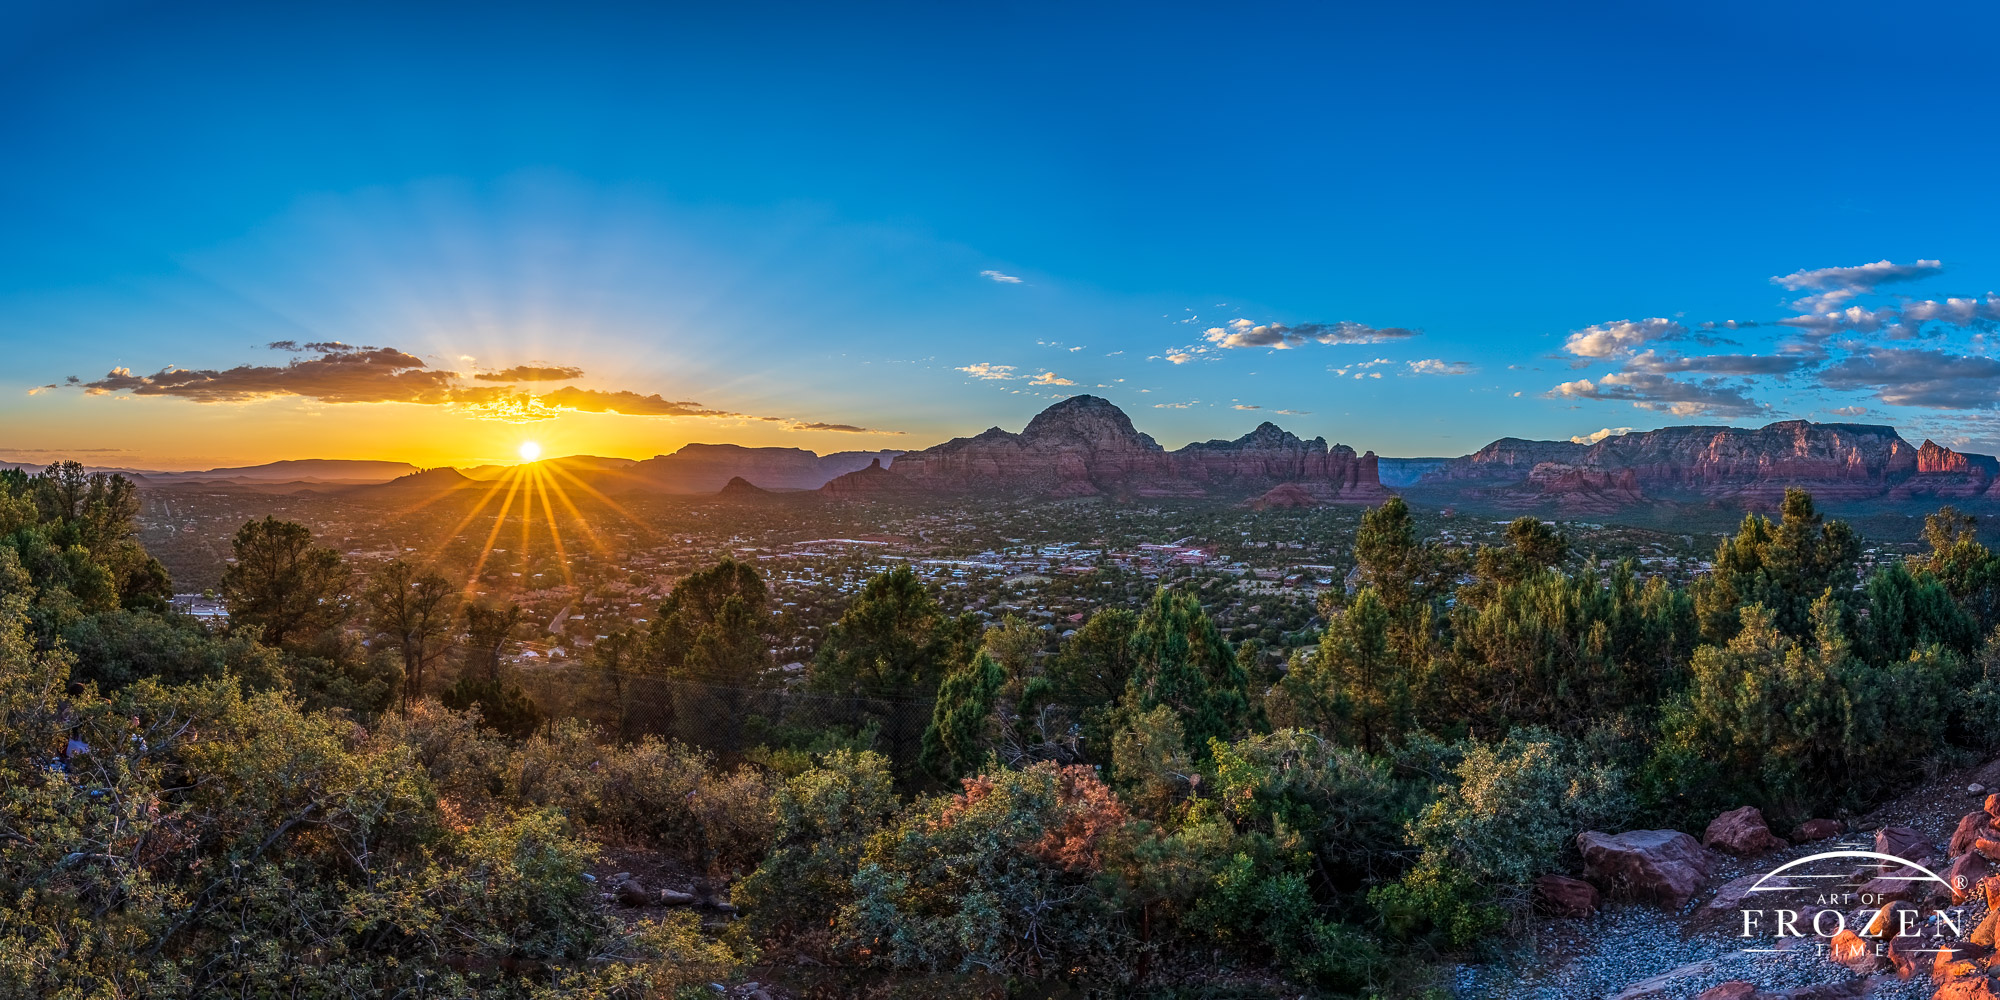 Panoramic sunset from Sedona Airport Scenic Lookout where the sun’s rays paint Red Rock Country in golden light and a sunburst appears over the distant Cockscomb Rock formation and Black Mountain